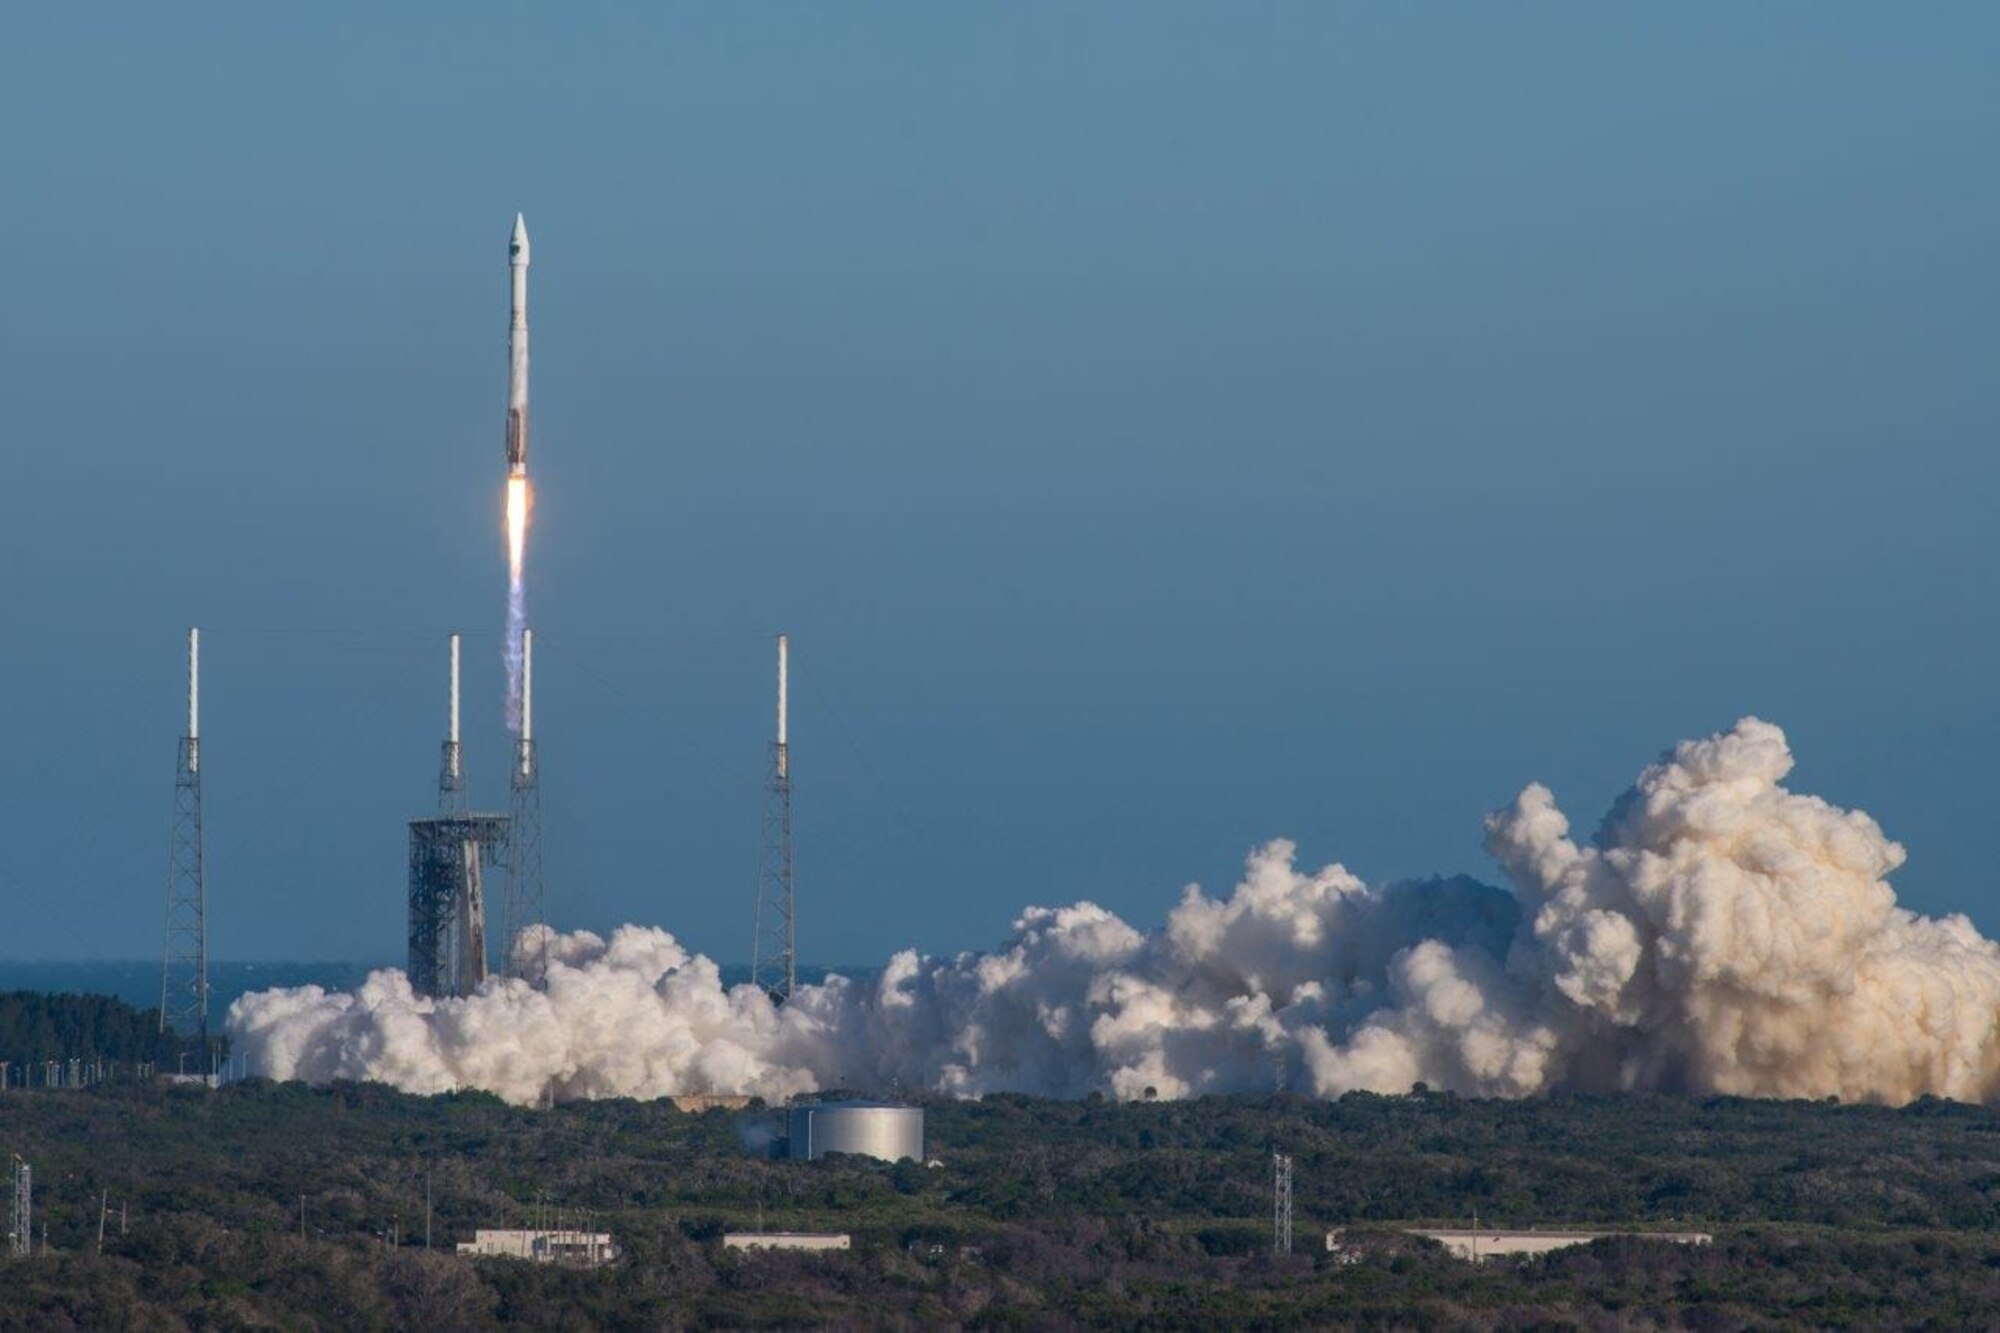 Cape Canaveral Air Force Station, Fla. (Feb. 5, 2016) – A United Launch Alliance (ULA) Atlas V rocket carrying the GPS IIF-12  mission lifted off from Space Launch Complex 41 at 8:38 a.m. EST / 5:38 a.m. PST (Courtesy photo: ULA) 